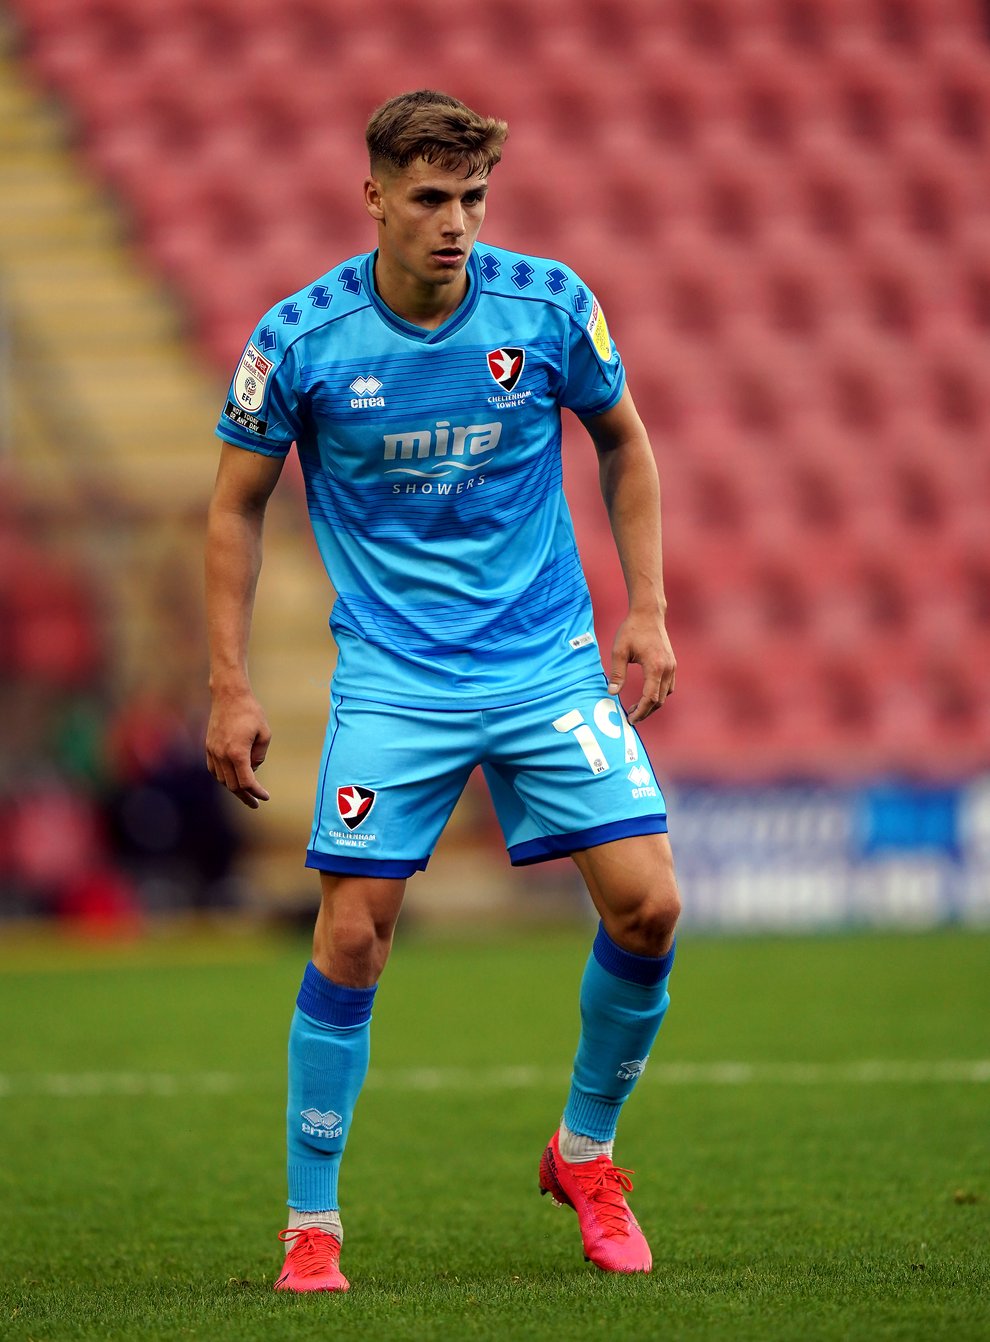 George Lloyd has joined on a season loan from Cheltenham (Tess Derry/PA)